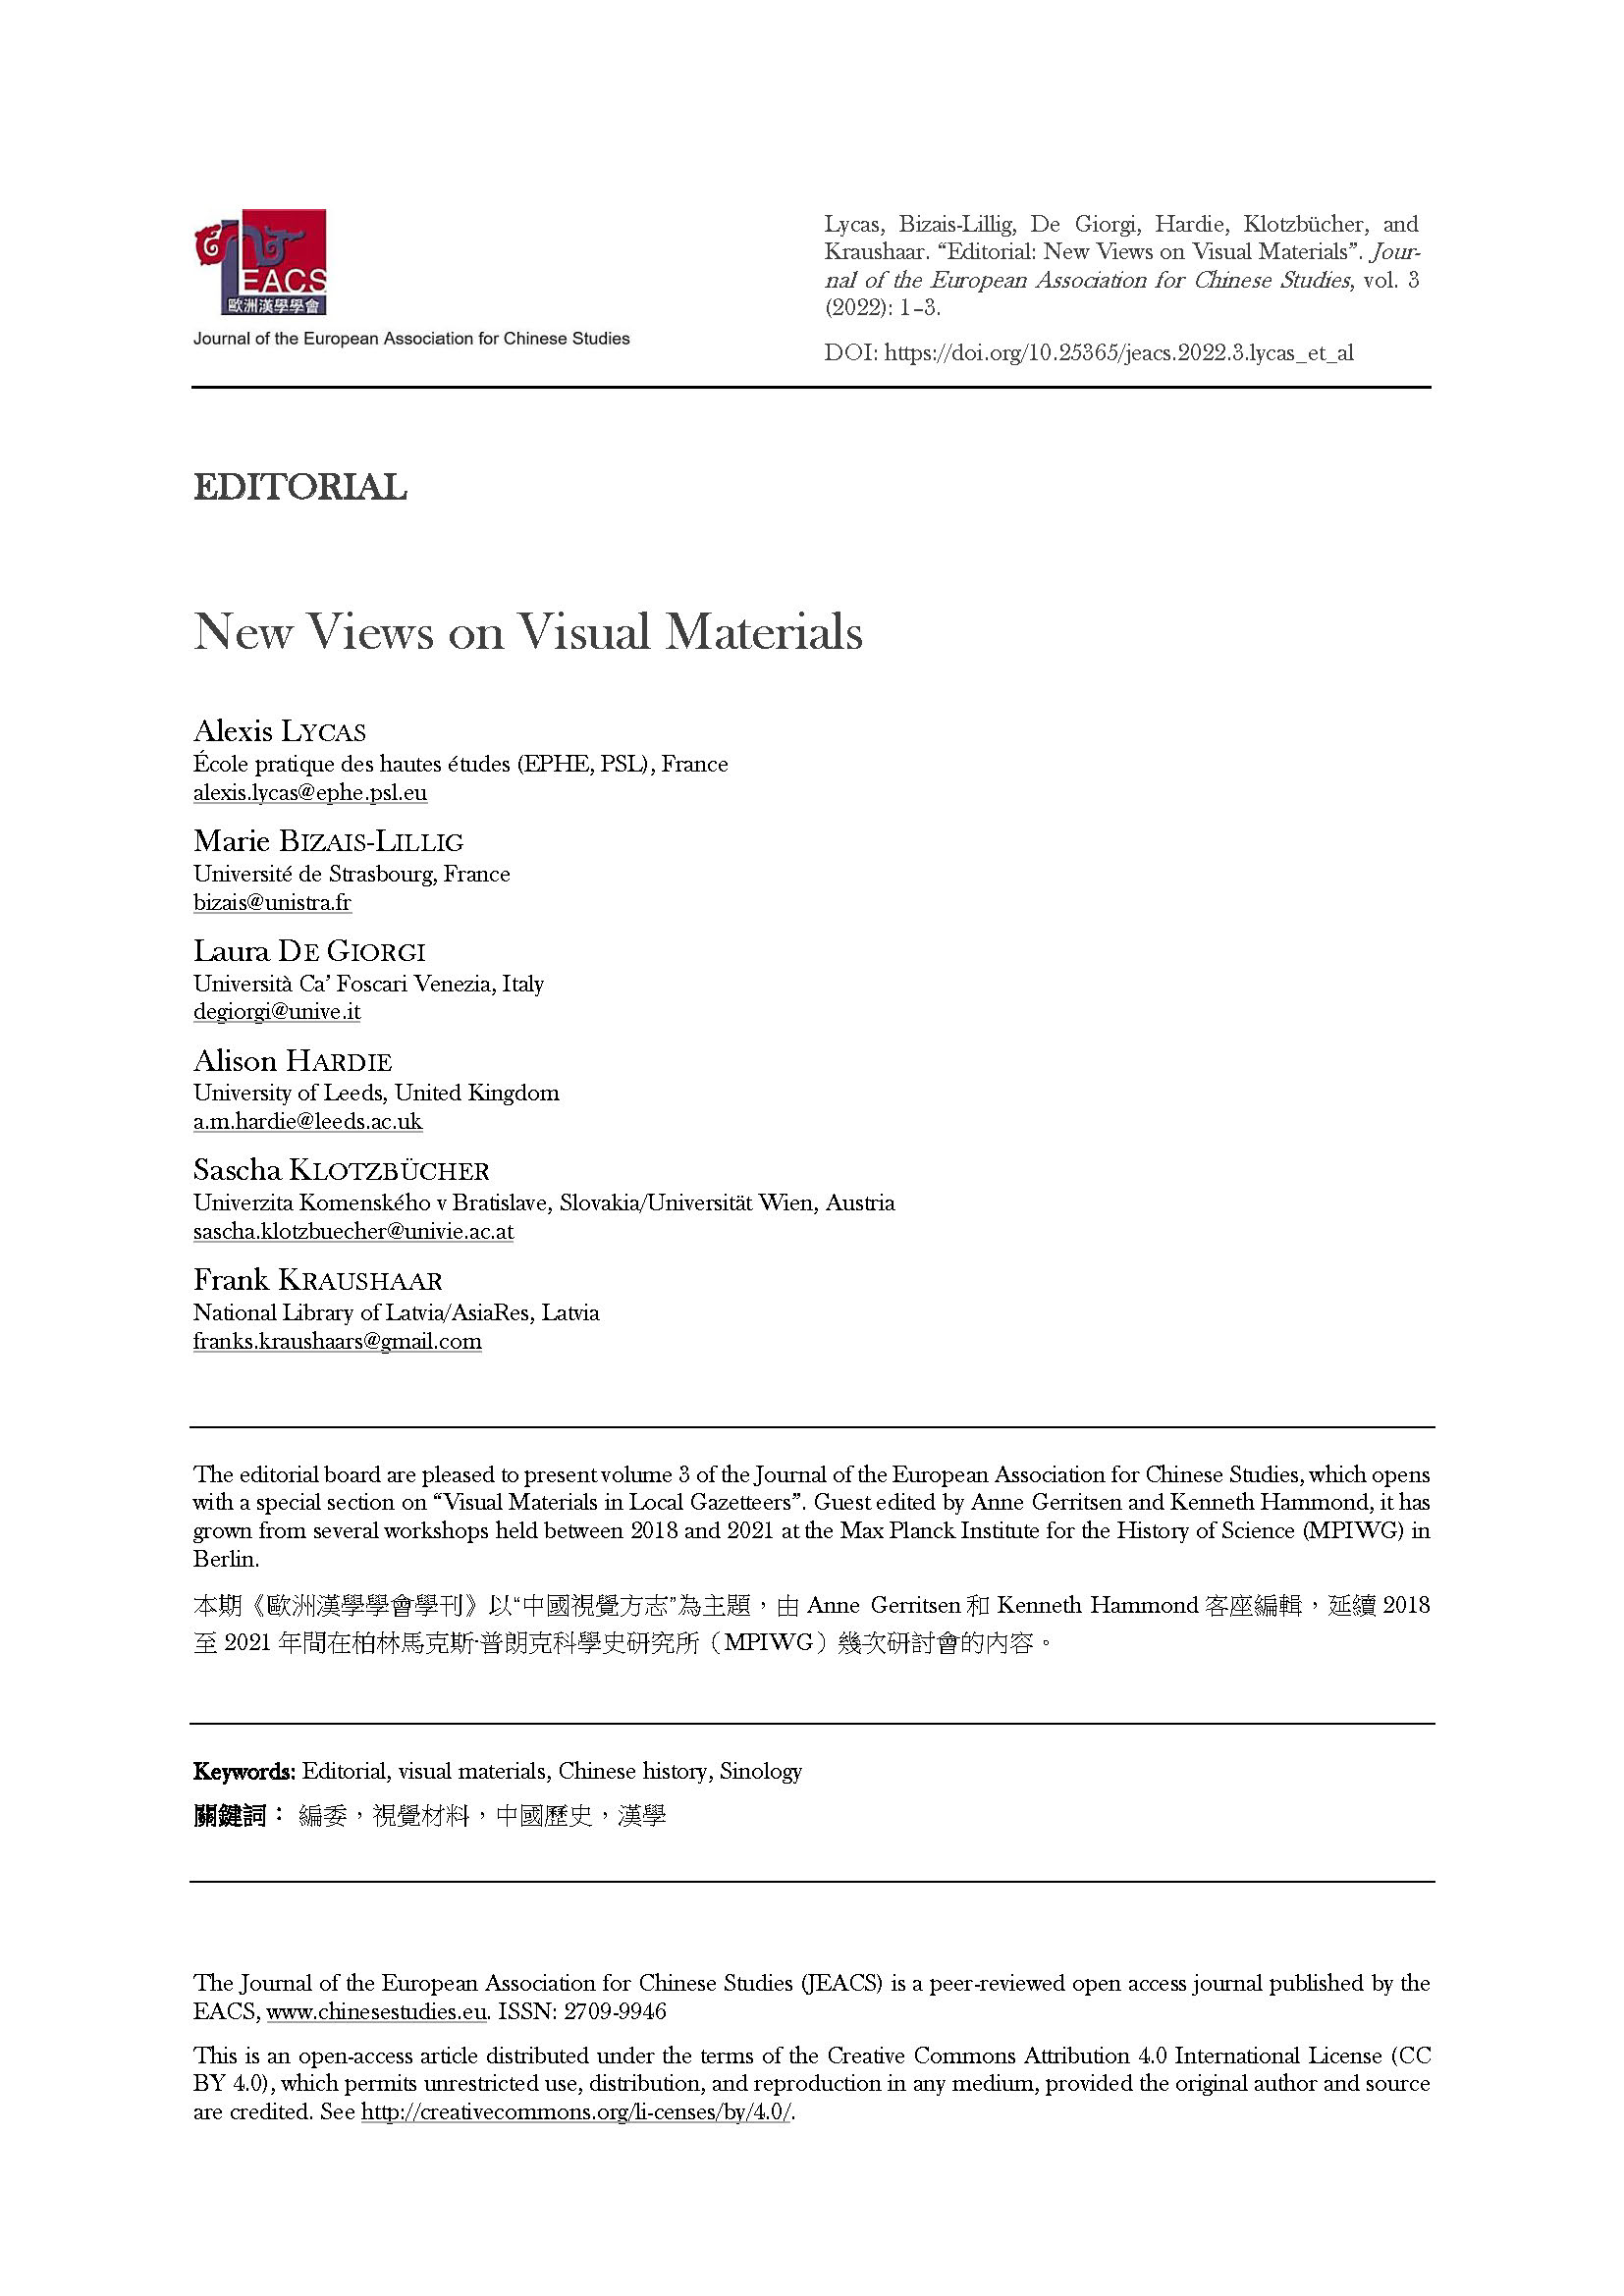 Editorial on “New Views on Visual Materials”